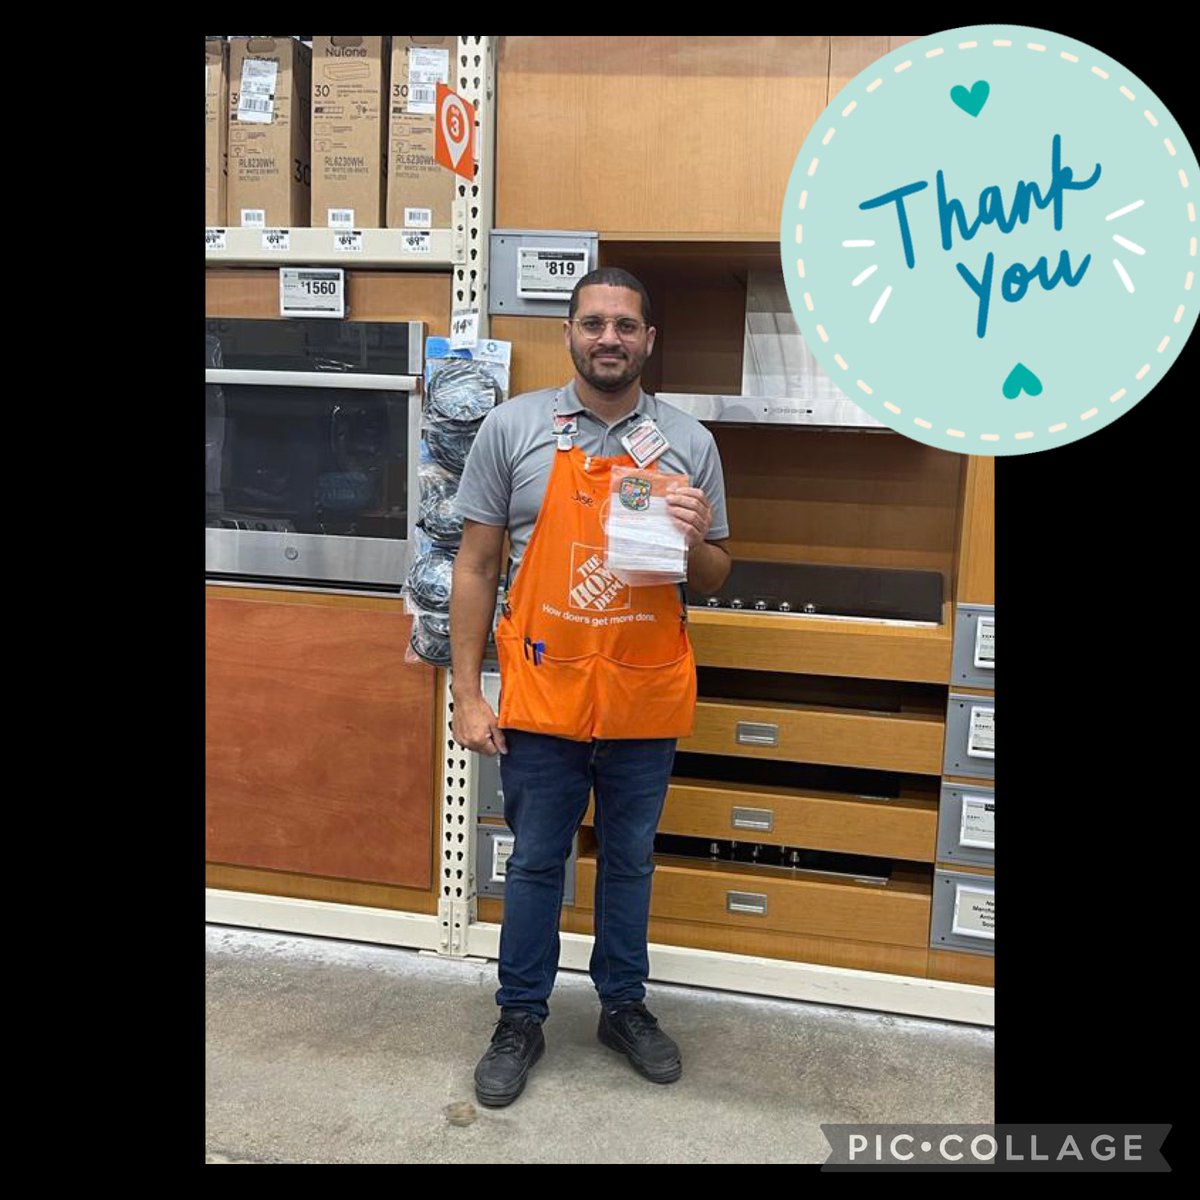 Many thanks to DS Jose for taking care of the associates and the business. He was recognized inthe most recent Town Hall. ⁦@YamilORivera1⁩ ⁦@SASM6409Yahaira⁩ ⁦@MoriRosemarie⁩ ⁦@JuanRiv33006222⁩ ⁦@EvelixSepulved2⁩